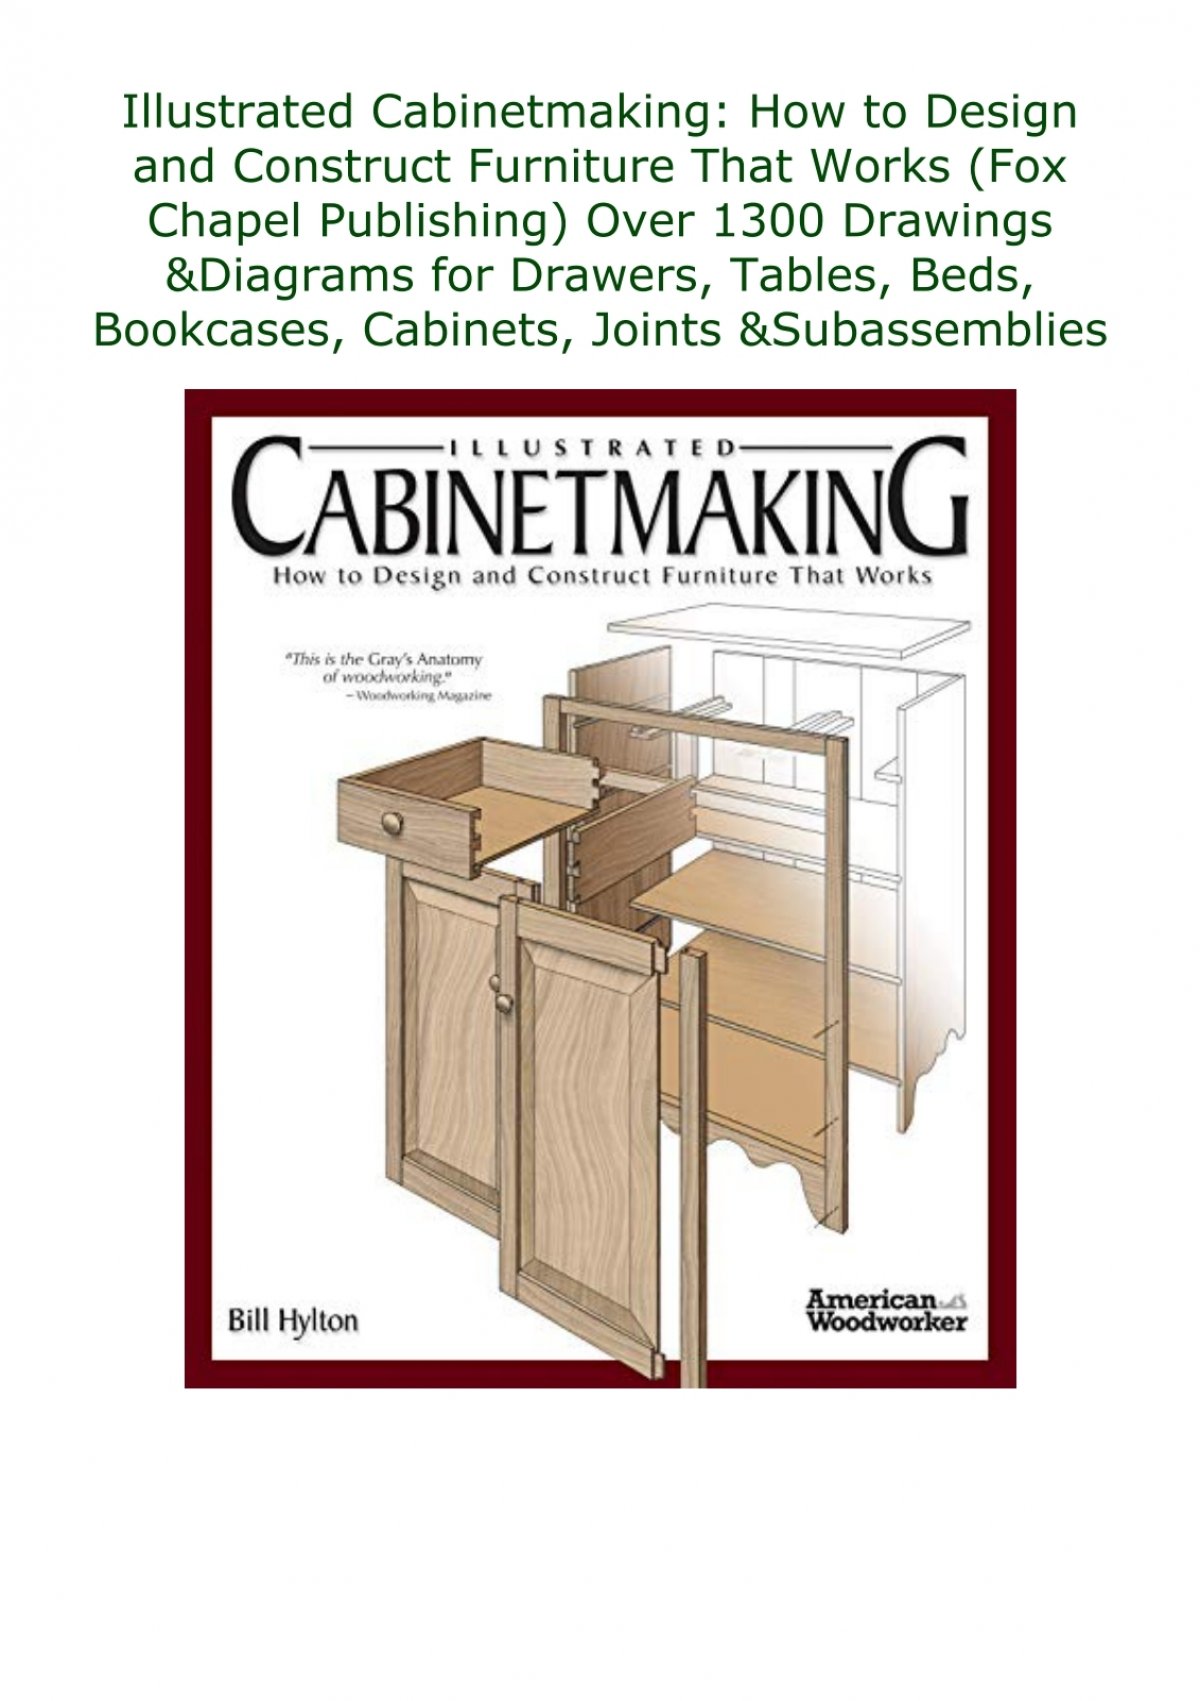 illustrated cabinetmaking pdf download